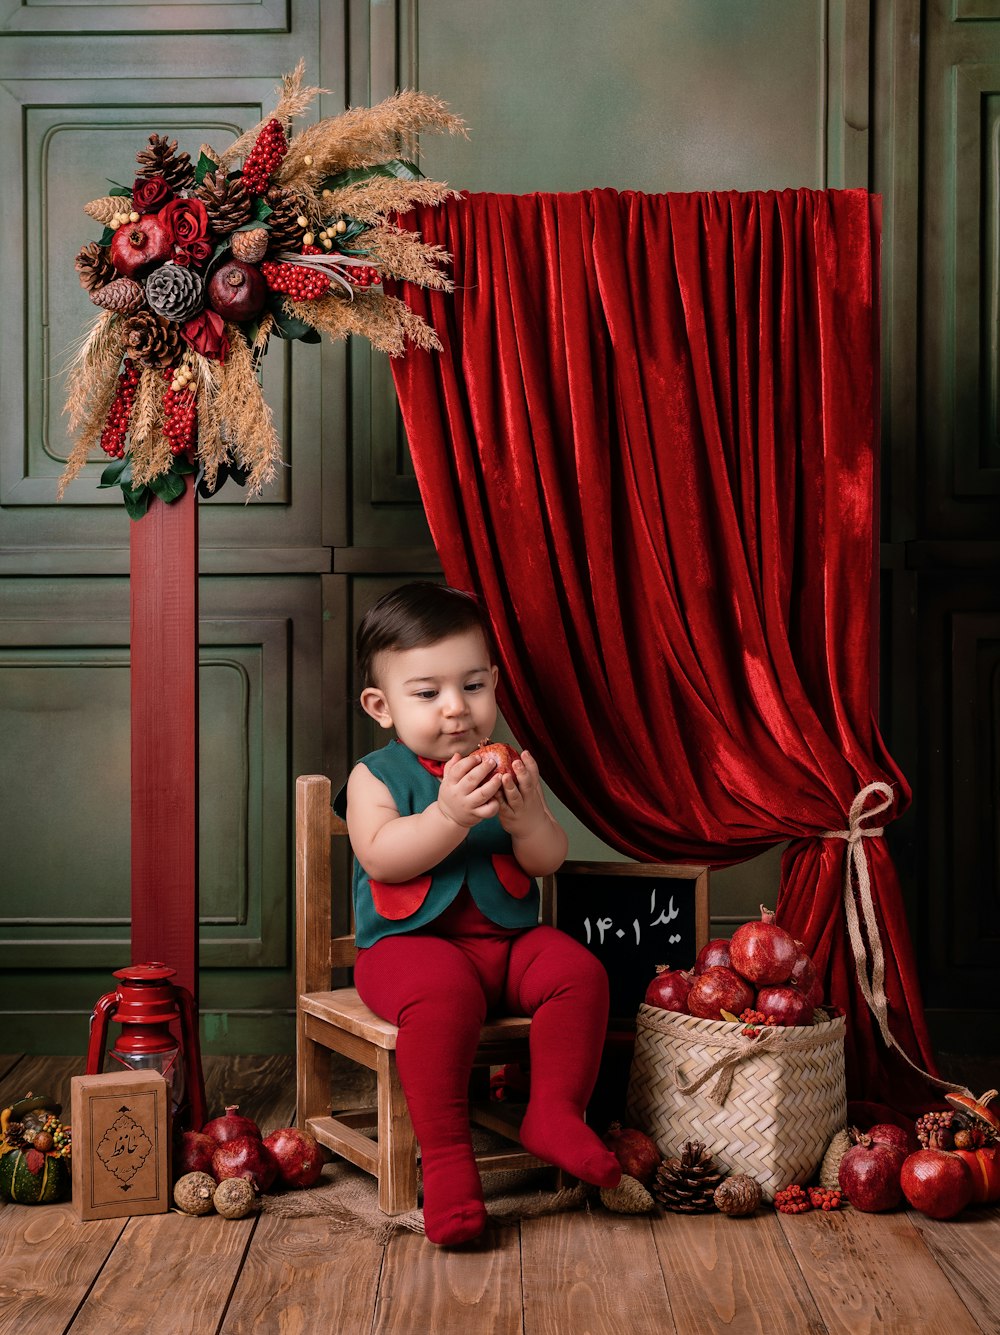 a little boy sitting on a chair in front of a red curtain